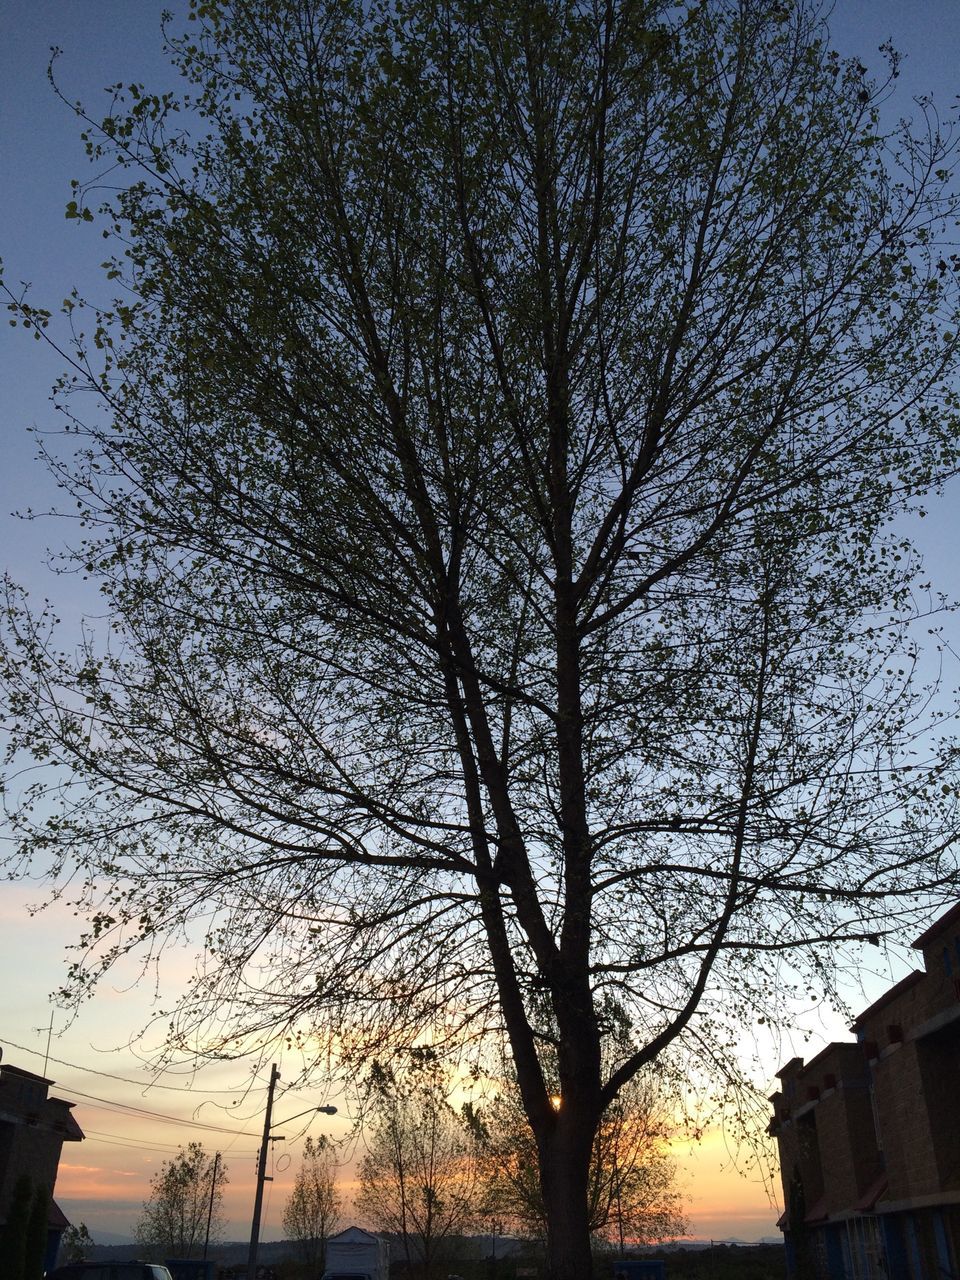 tree, low angle view, bare tree, silhouette, branch, building exterior, sunset, built structure, architecture, sky, nature, beauty in nature, growth, outdoors, no people, tranquility, tree trunk, dusk, city, house